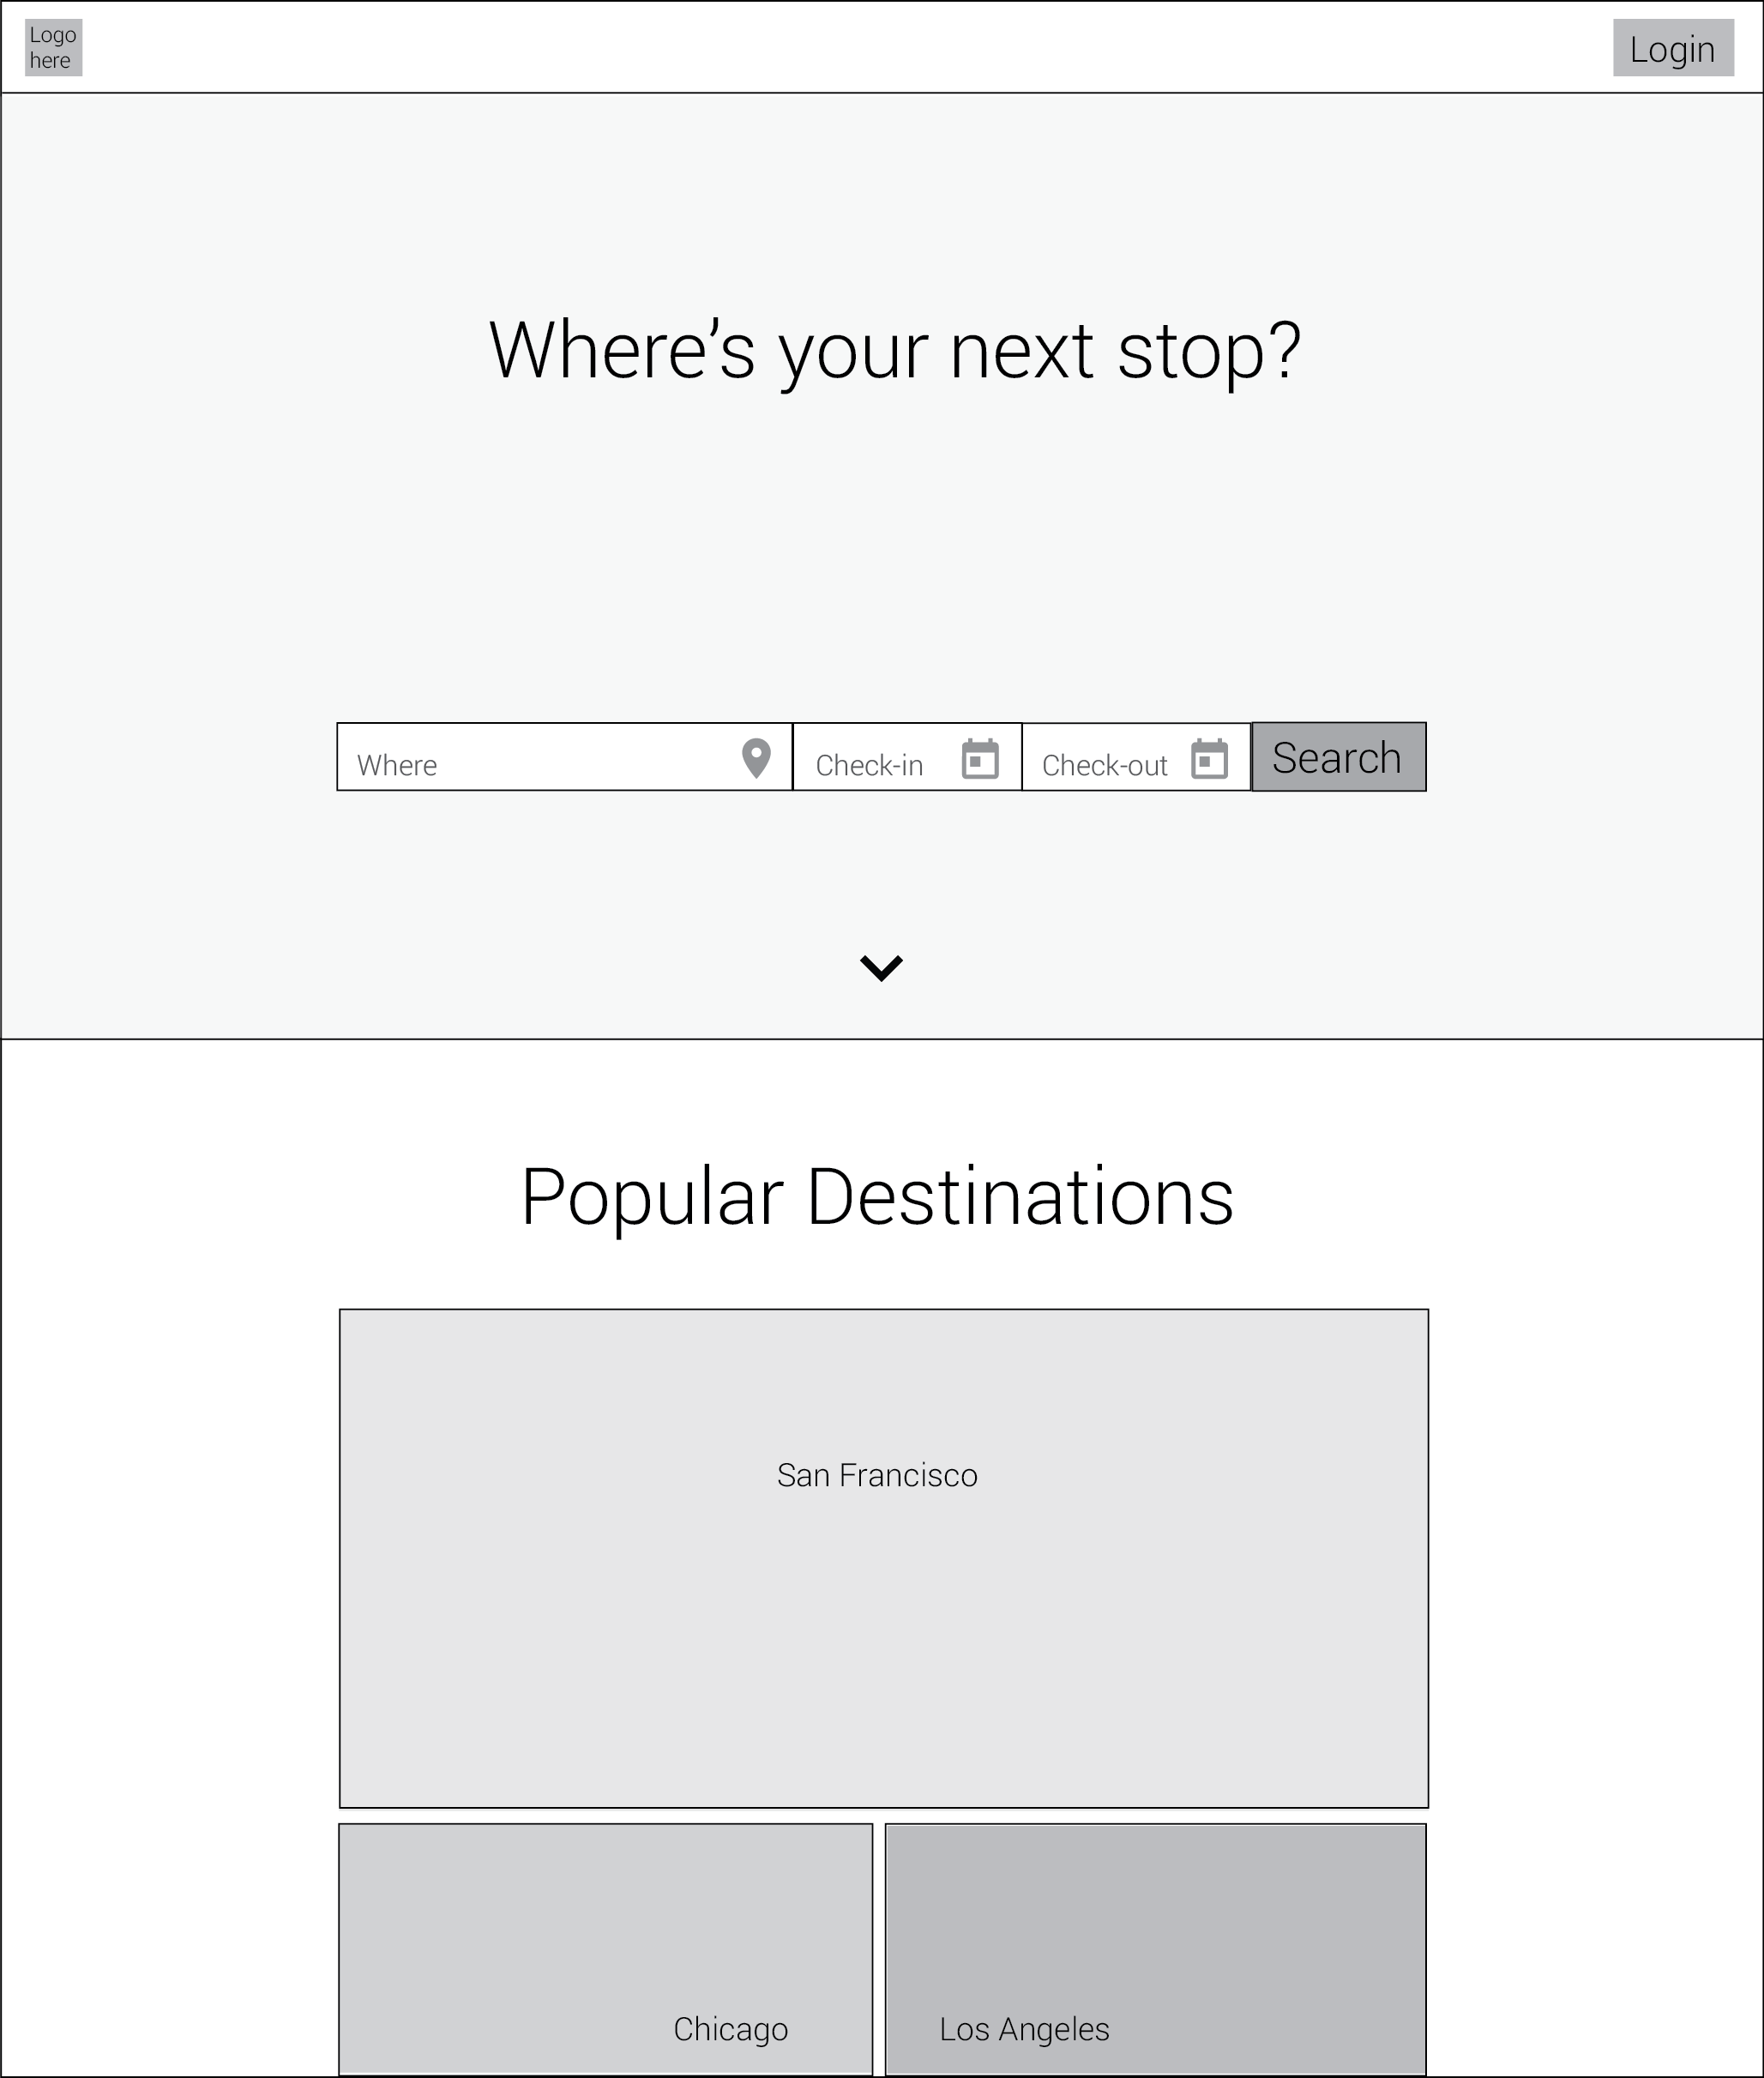 Wireframe, Home screen - User can filter Location and Date at once
											 to get to the Candidate List screen